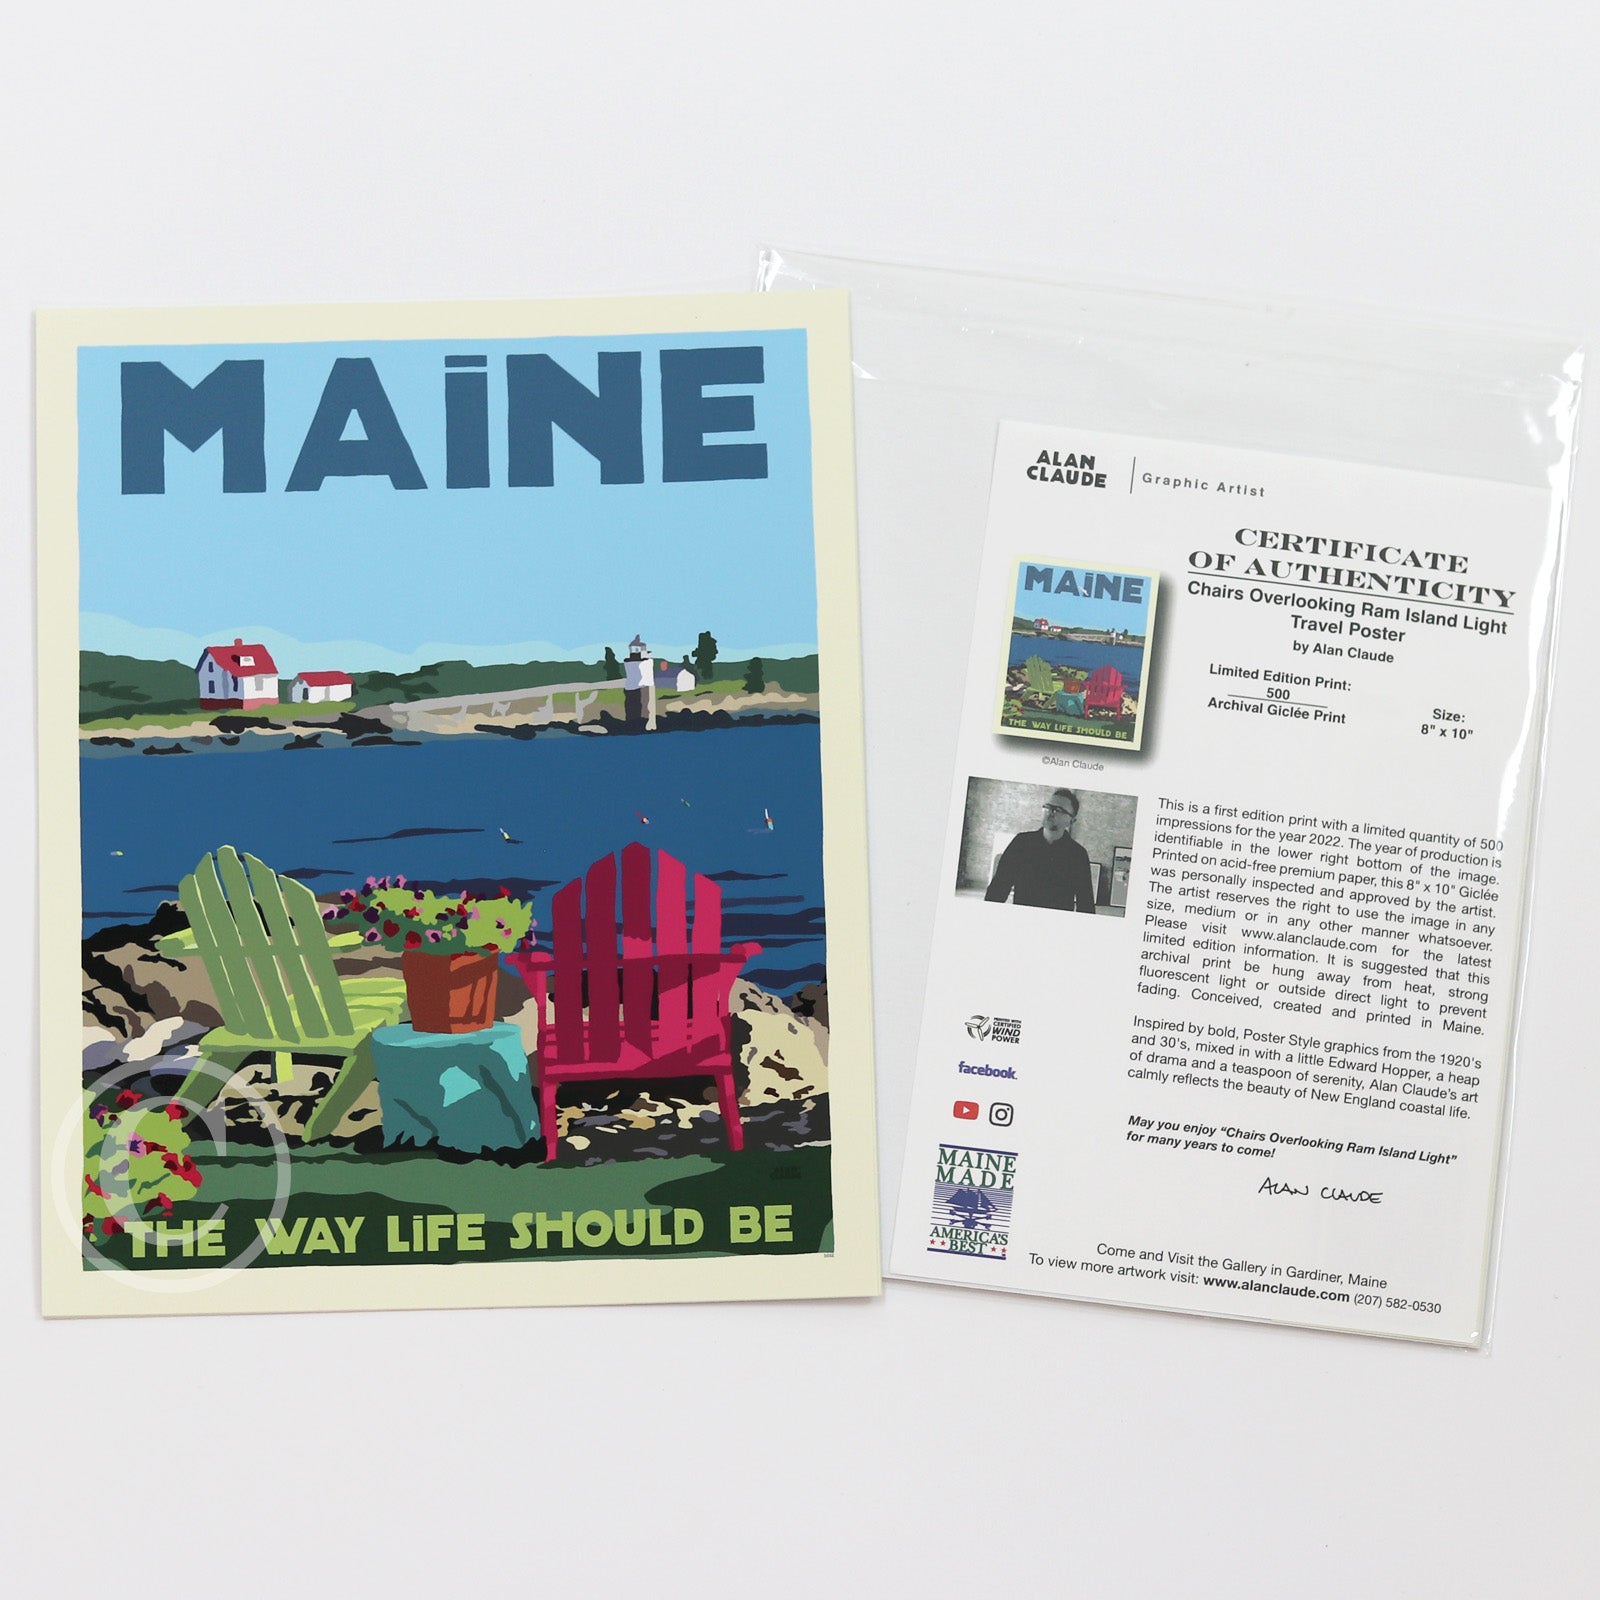 Chairs Overlooking Ram Island Light Maine The Way Life Should Be Art Print 8" x 10" Travel Poster By Alan Claude